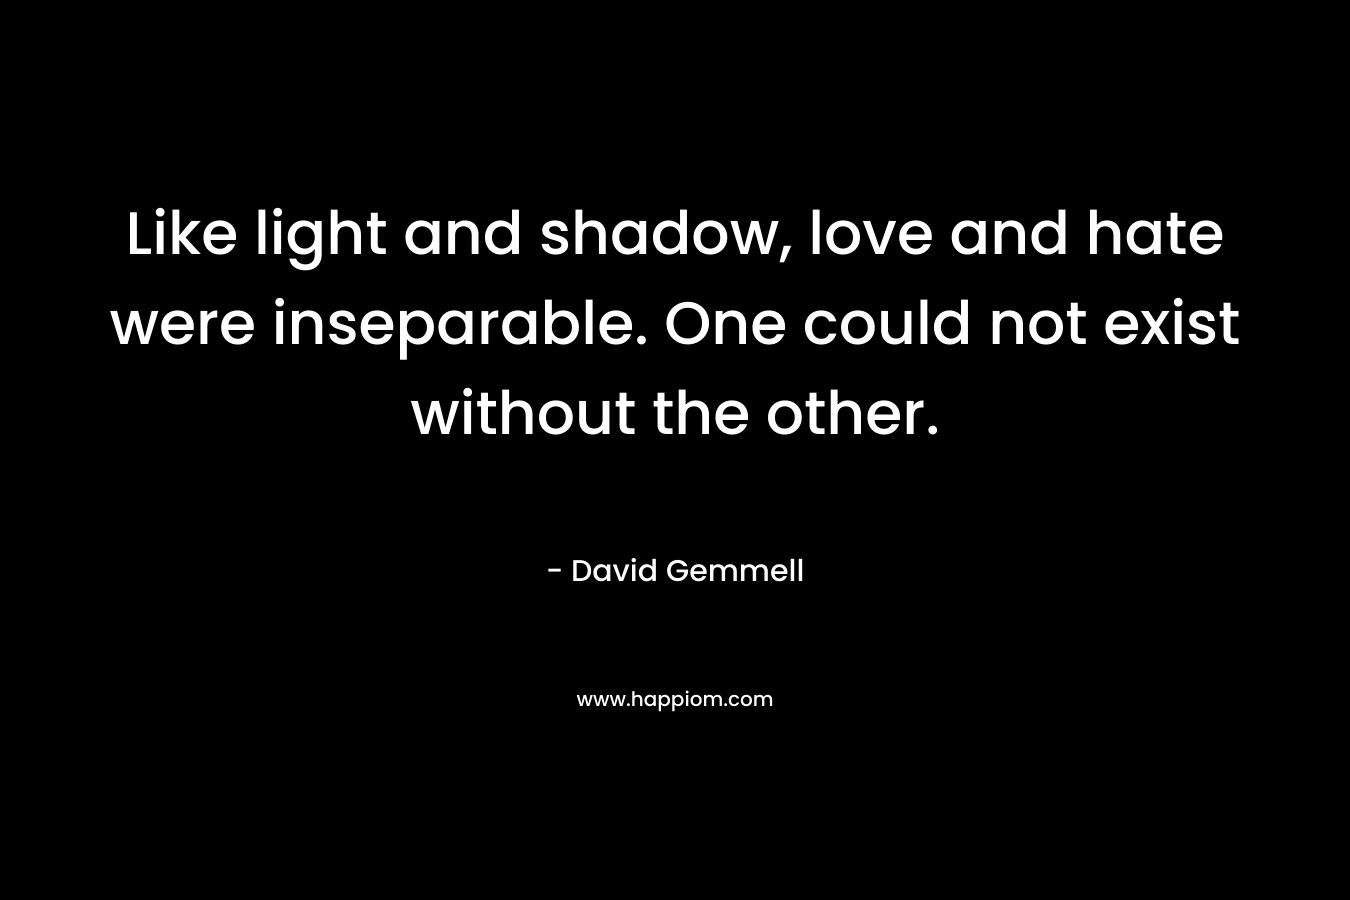 Like light and shadow, love and hate were inseparable. One could not exist without the other. – David Gemmell